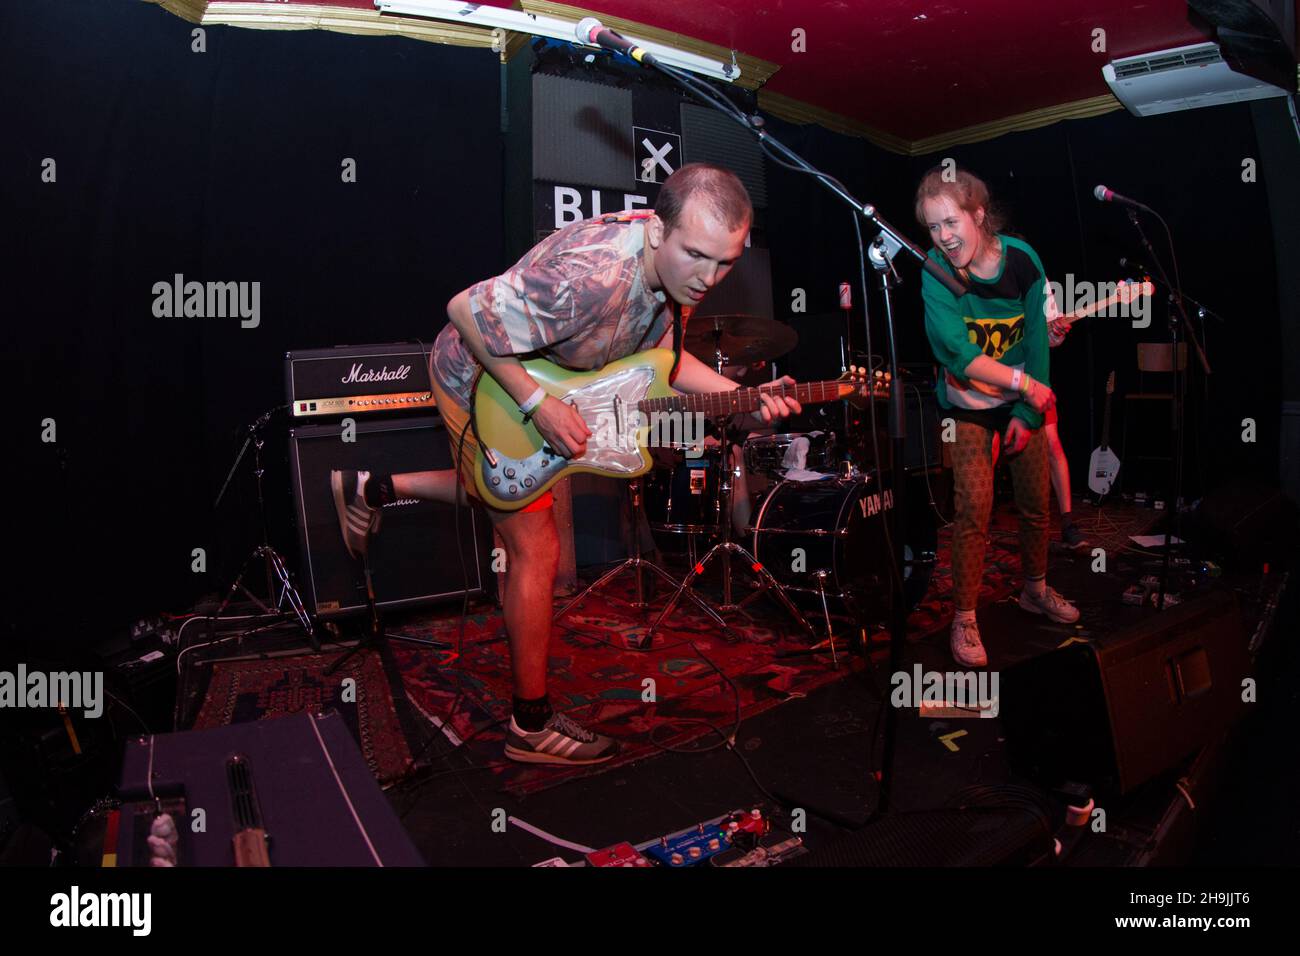 Norwegian band Pom Poko performing live on stage at Bleach on day 2 of the  2017 Great Escape Festival, a music industry showcase for new talent held  in Brighton, UK. Photo date: